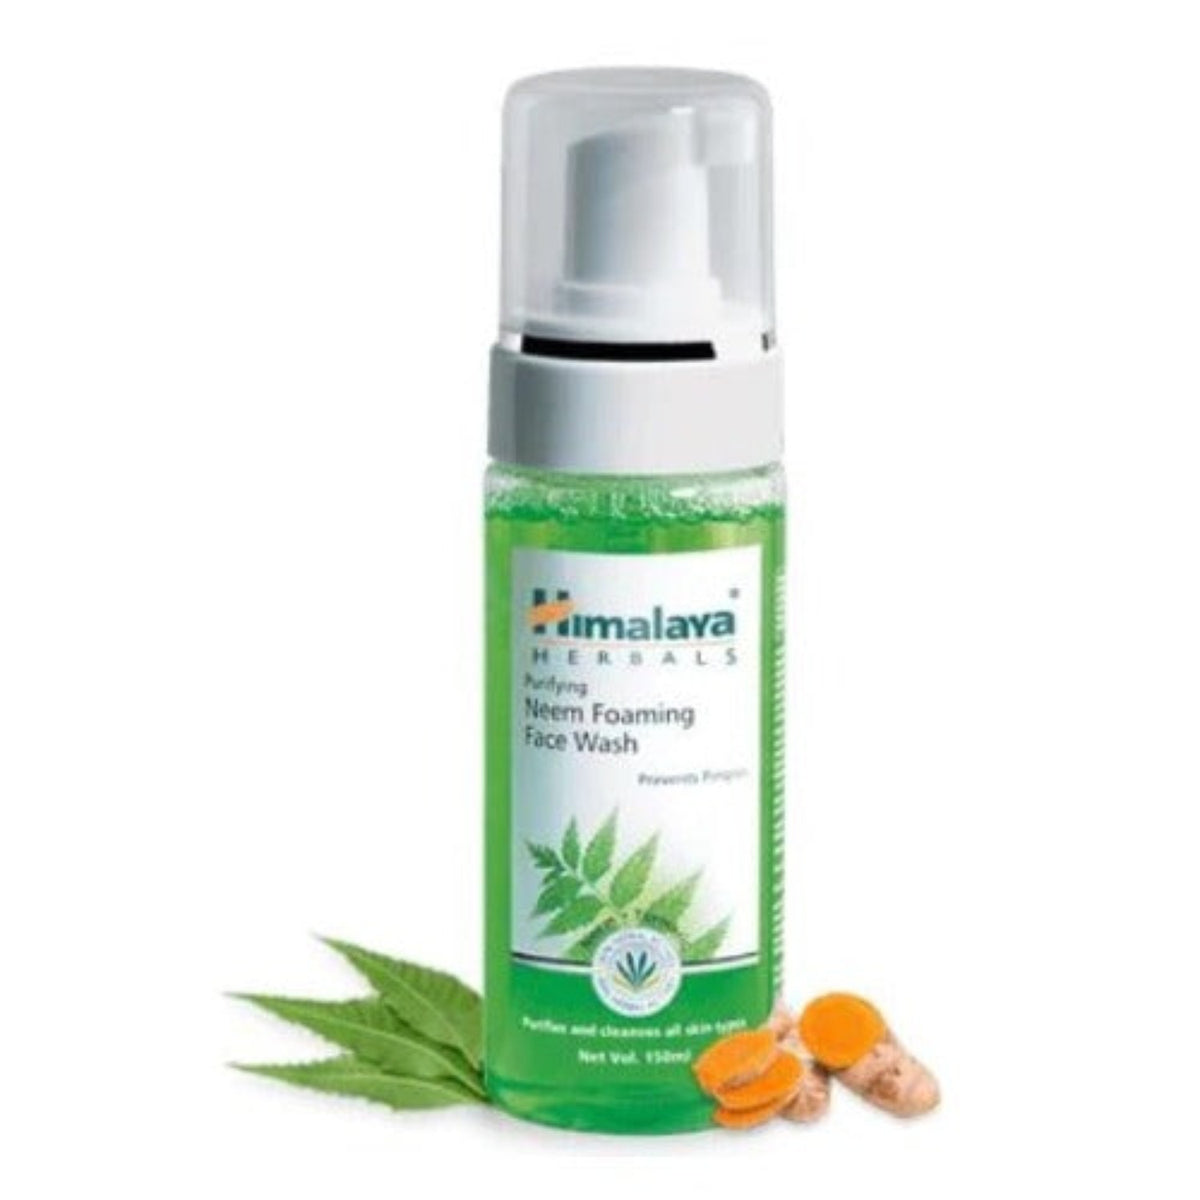 Himalaya Herbal Ayurvedic Personal Care Purifying Neem Foaming Purifies And Cleanses All Skin Types Face Wash